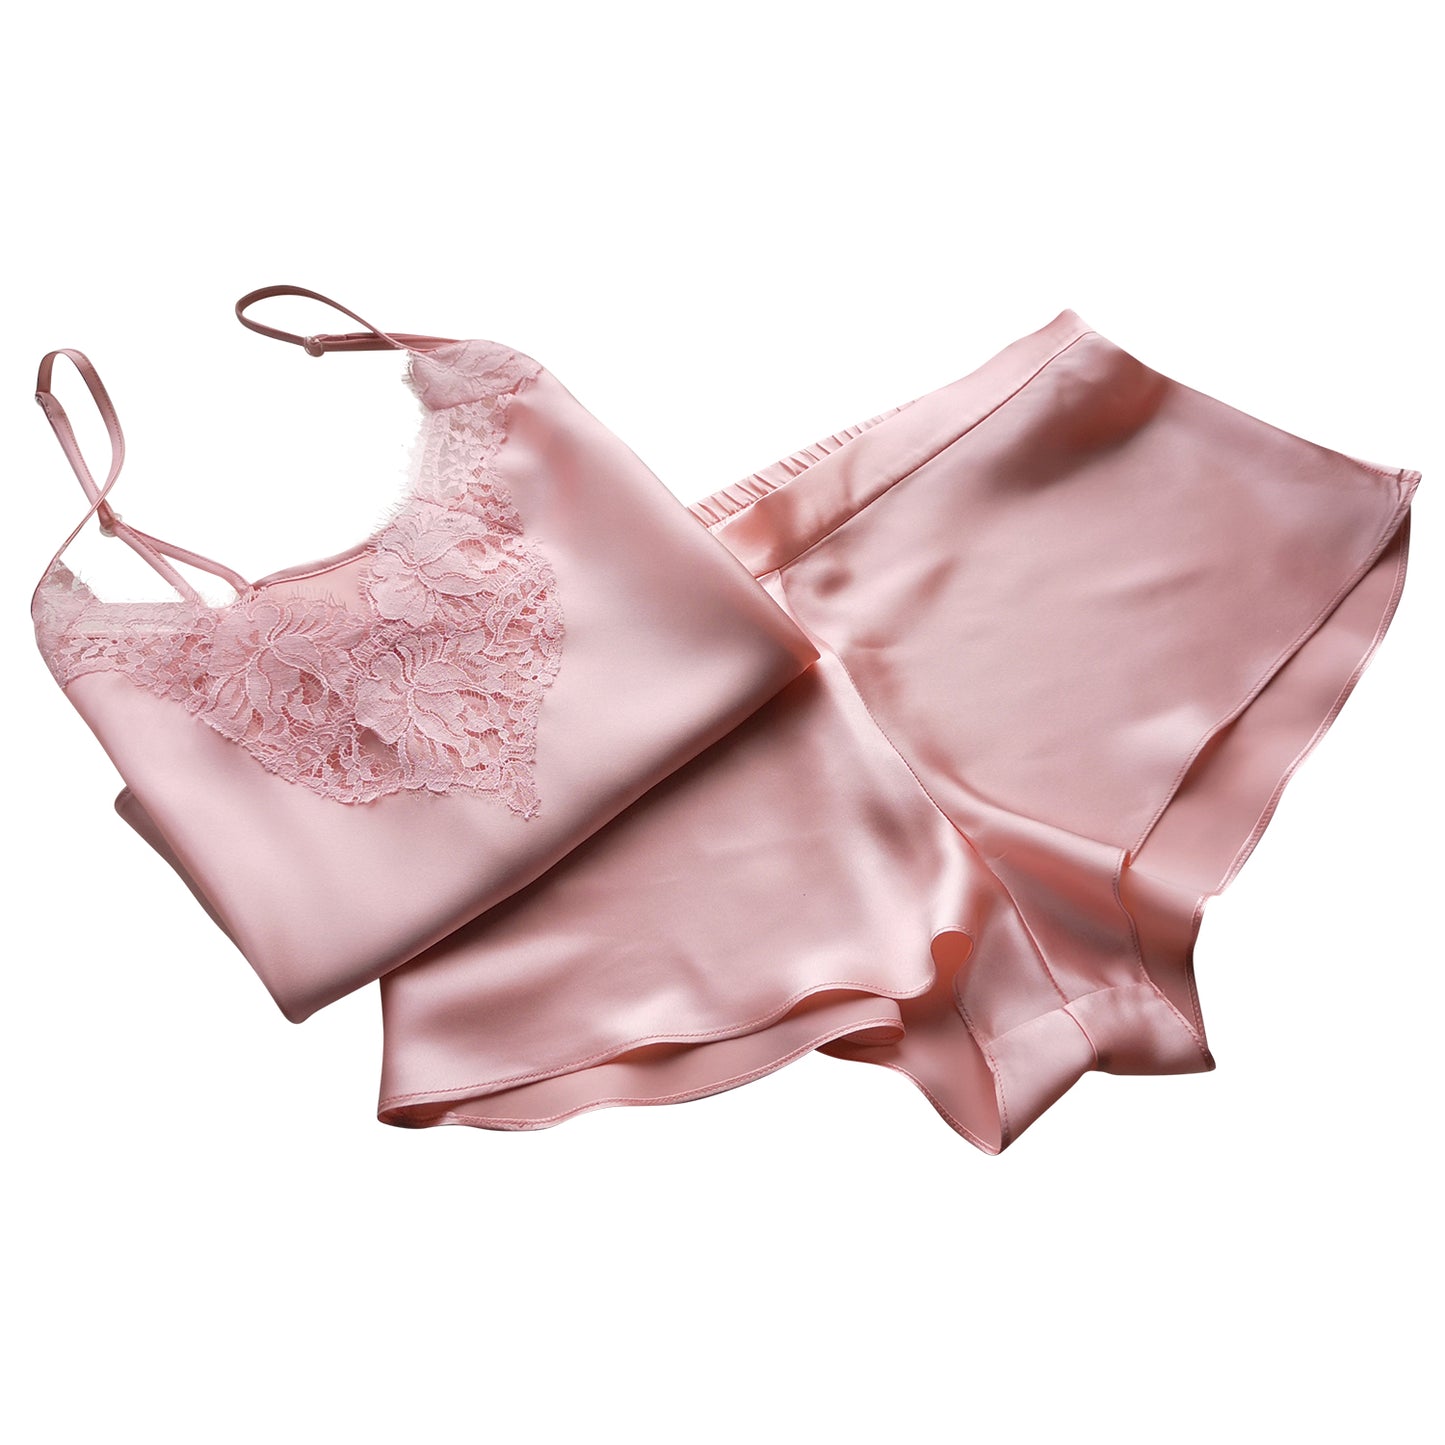 Silk French knickers